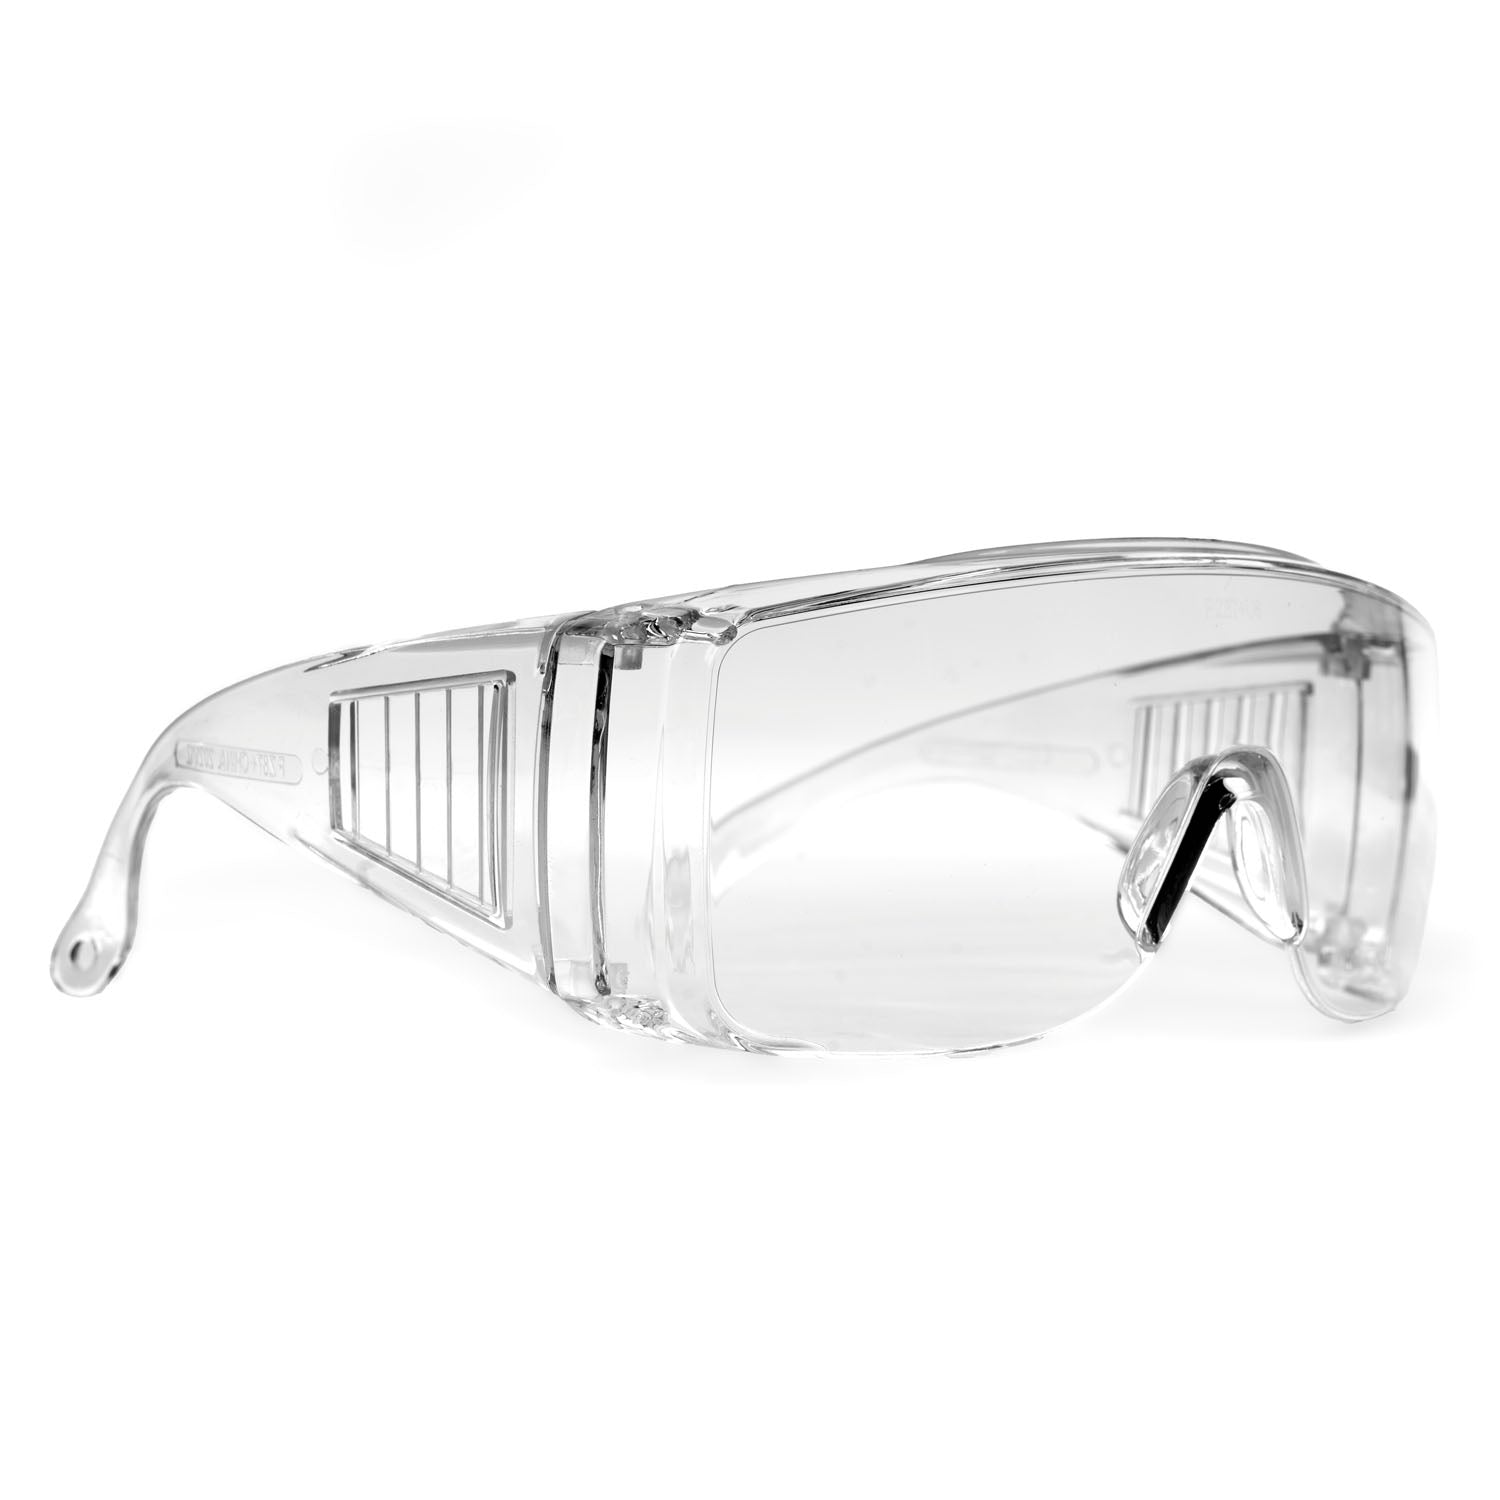 Forcefield Visitor’s Safety Glasses